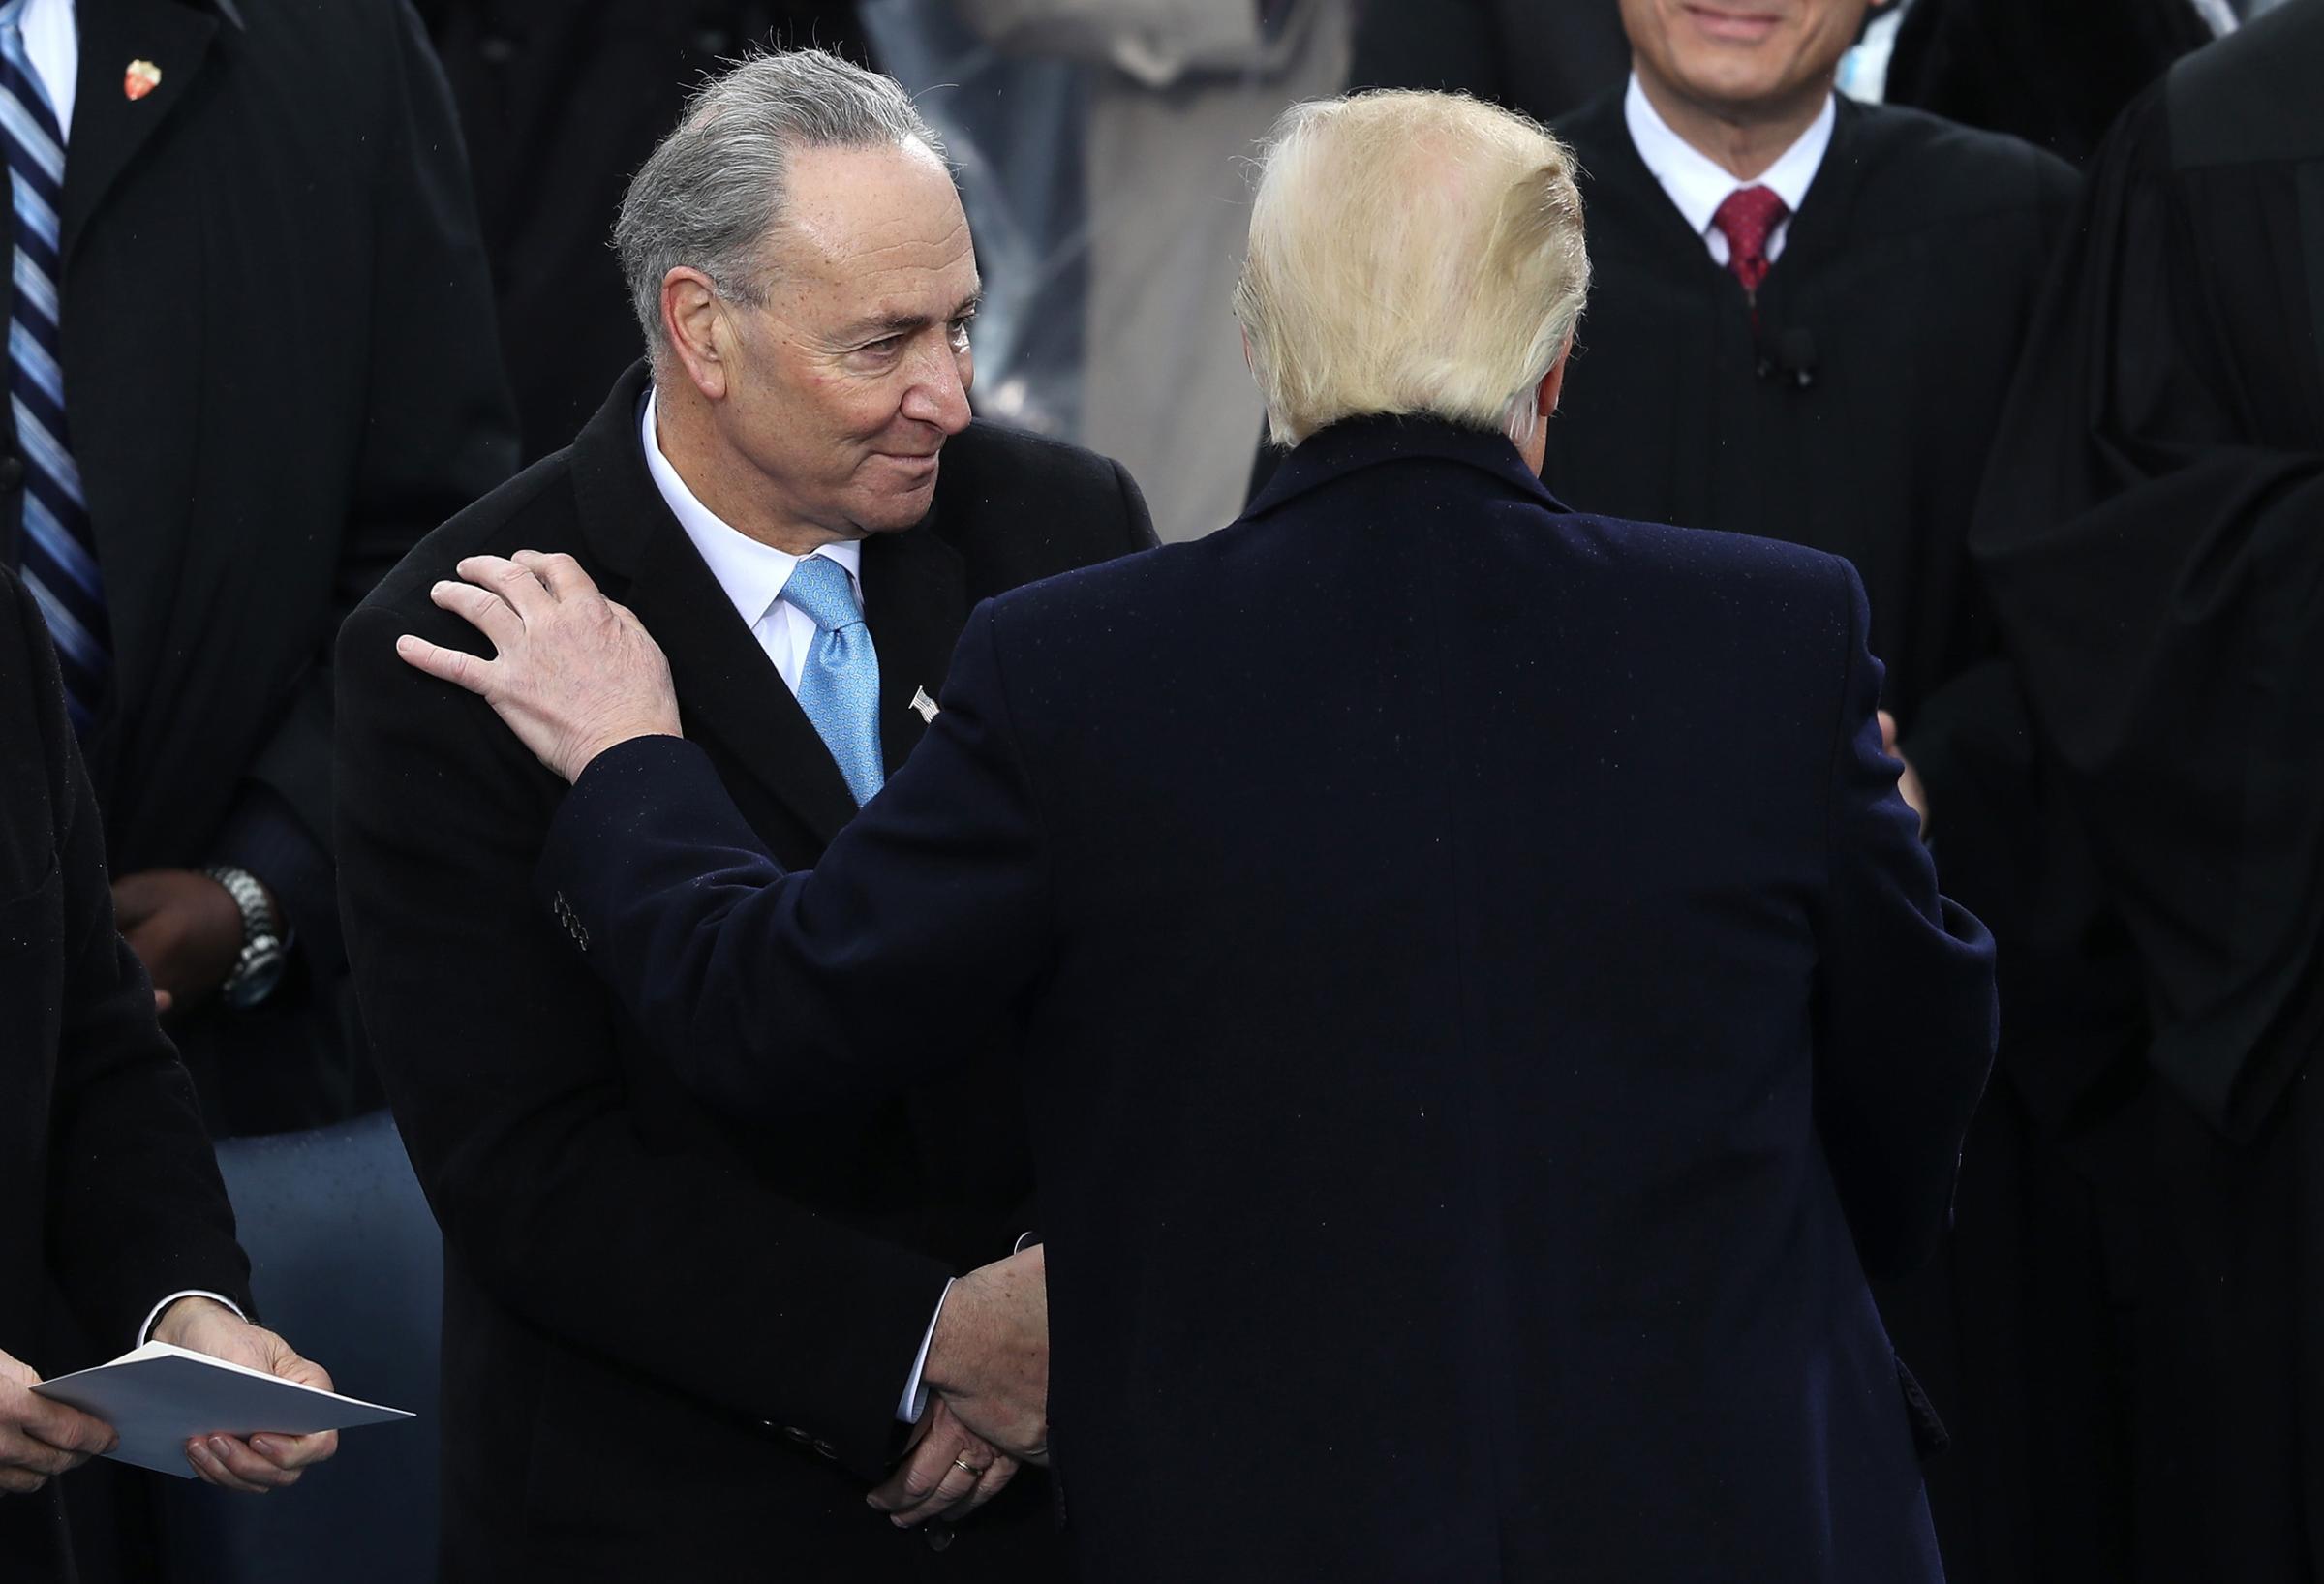 Sen. Chuck Schumer (D-NY) greets President Donald Trump on West Front of the U.S. Capitol on the day of the inauguration ceremony of Donald J. Trump, in Washington, D.C. Jan. 20, 2017.